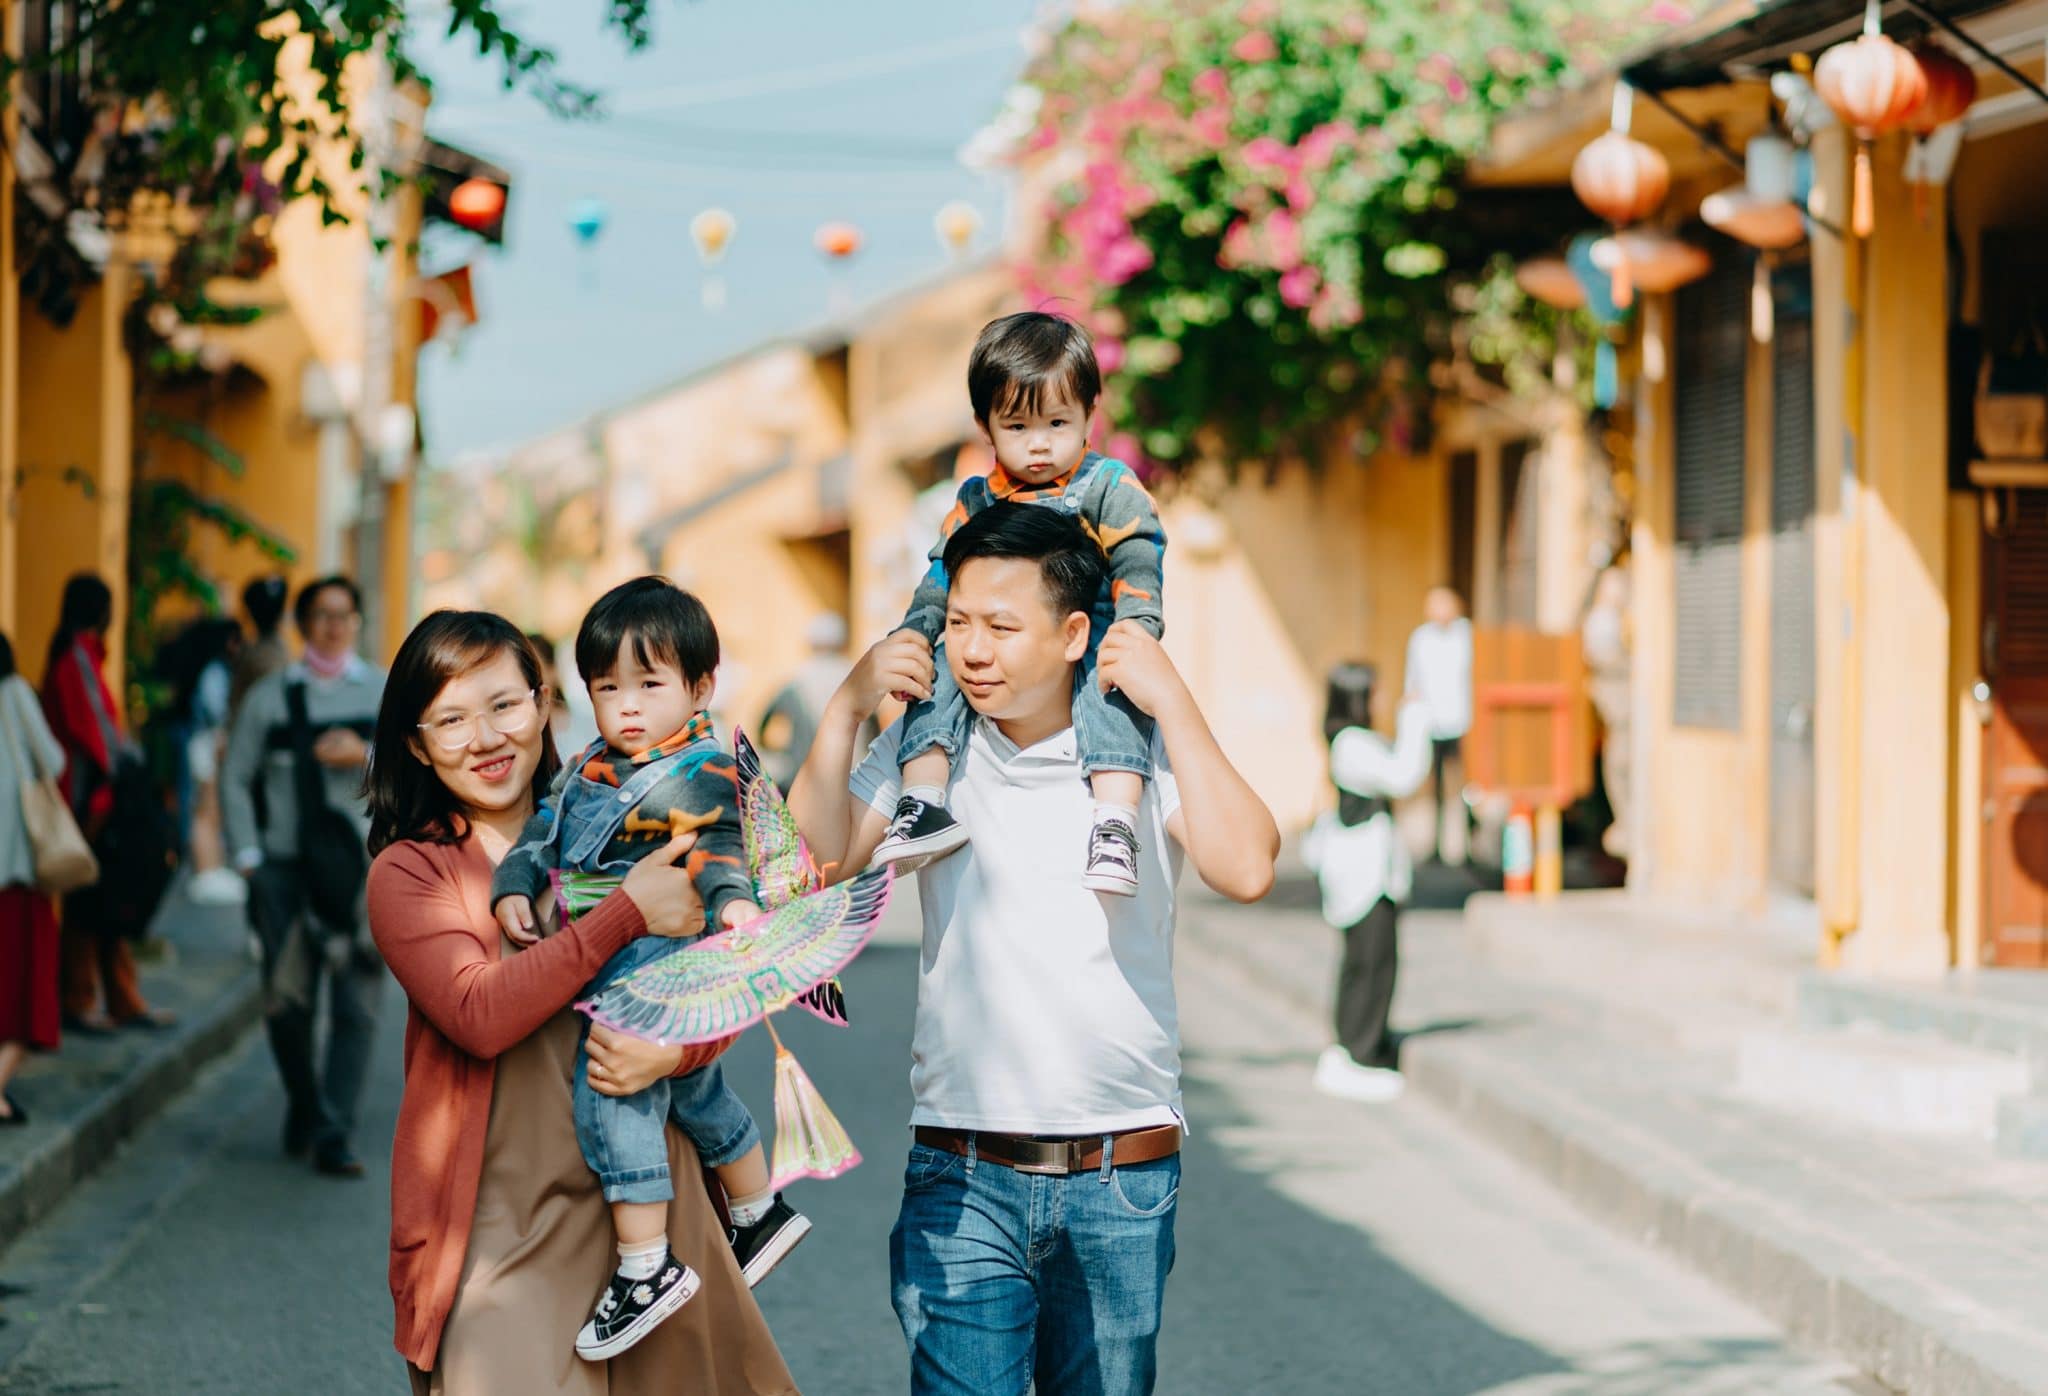 family - Photo by Trần Long from Pexels